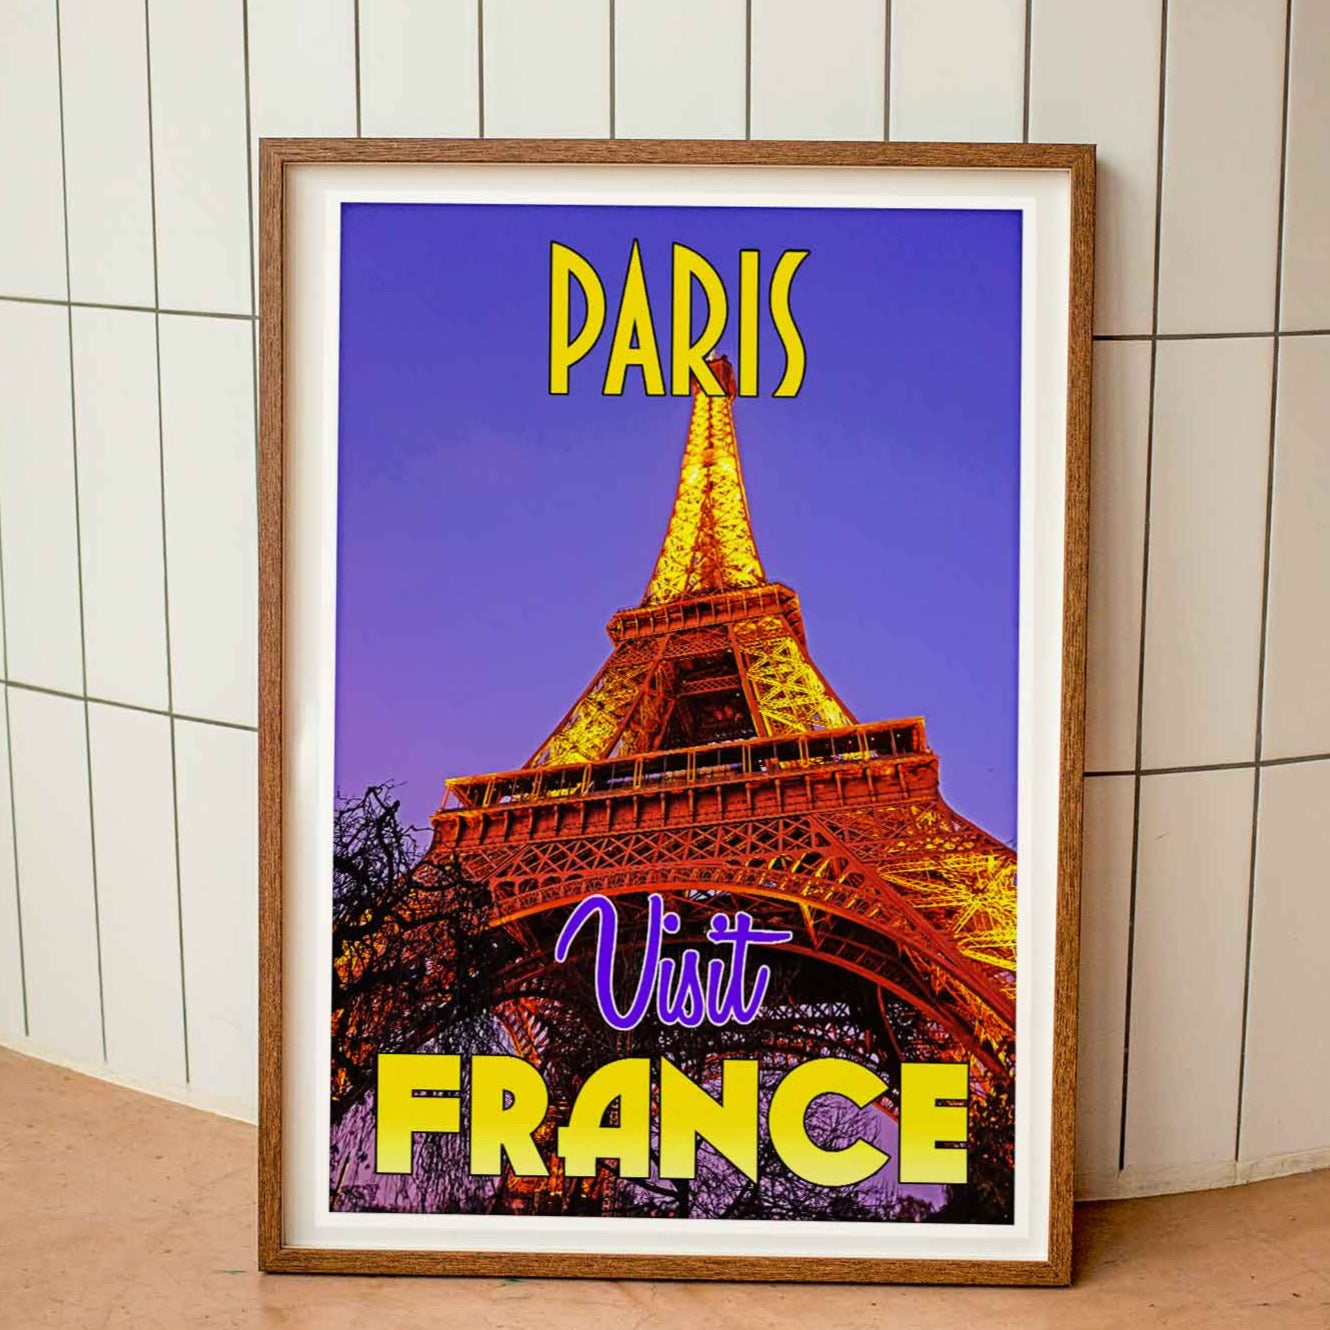 Wood-framed vintage travel poster print featuring the renowned Eiffel Tower in Paris, symbolizing the allure and charm of emerging travel destinations worldwide.